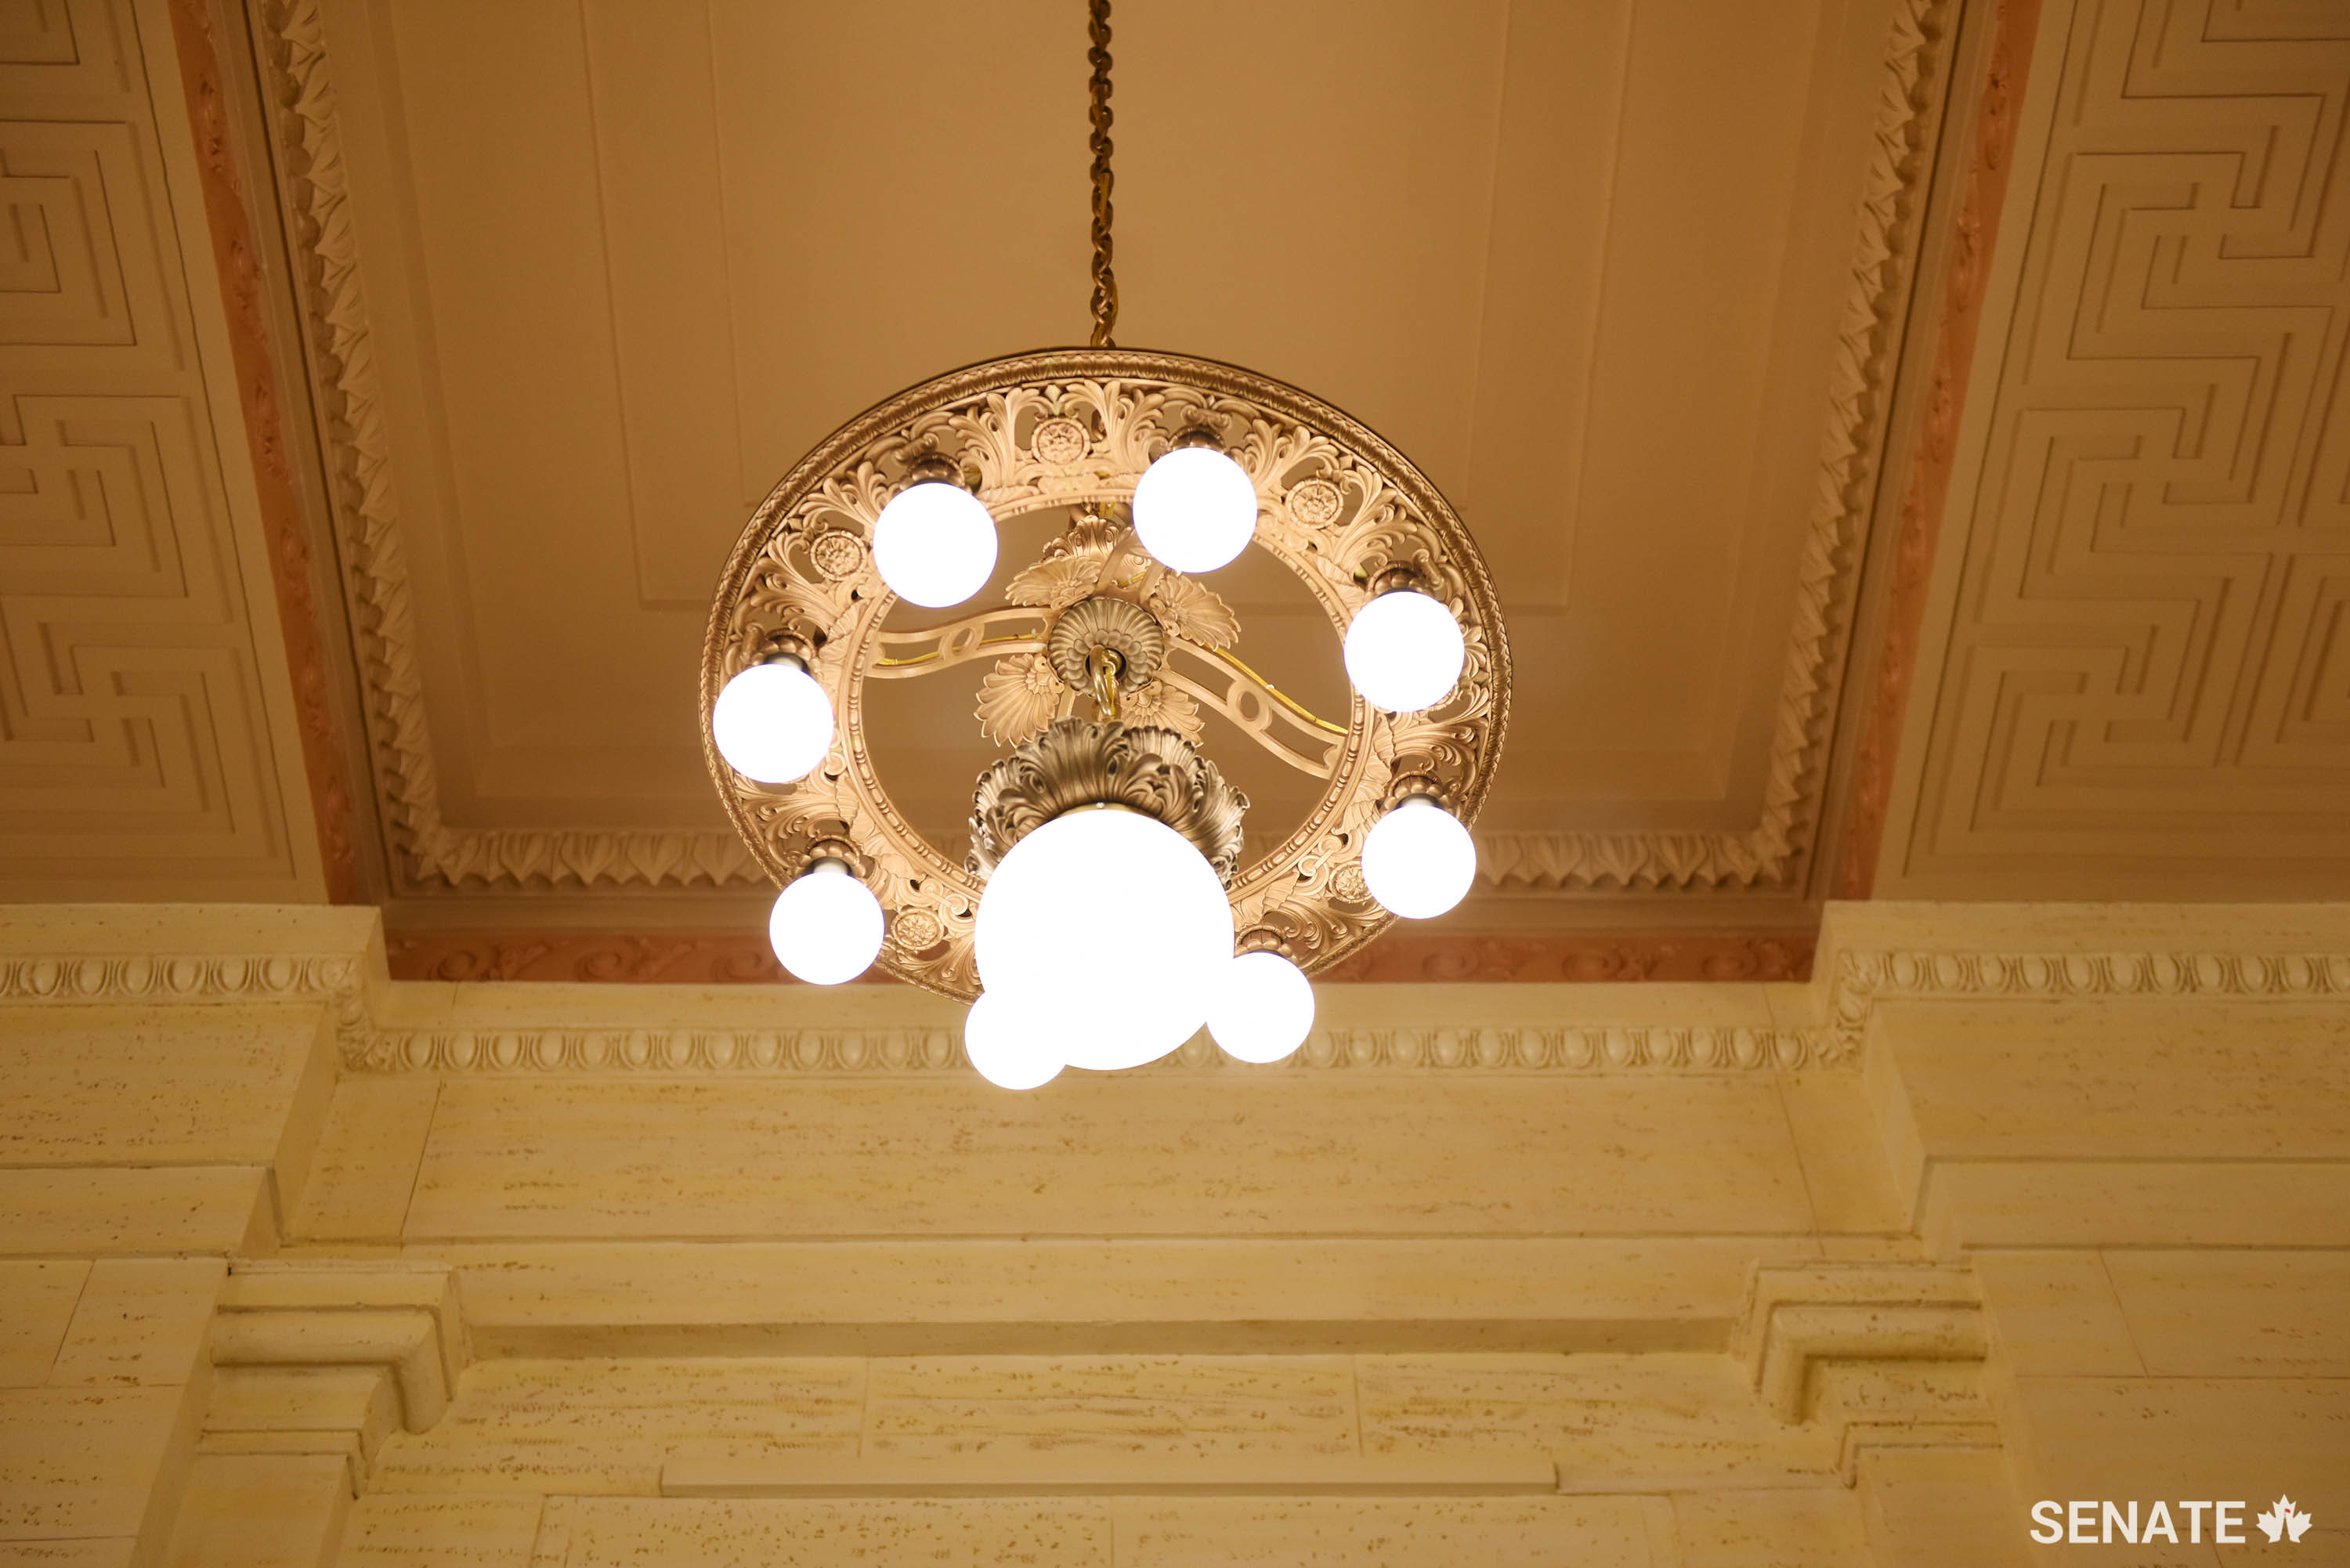 The building’s original 1912 chandeliers were carefully removed, cleaned and restored using new LED lighting and updated electrical features to improve energy efficiency. Recent developments in LED technology allow architects to maintain the warm light of the original fixtures.